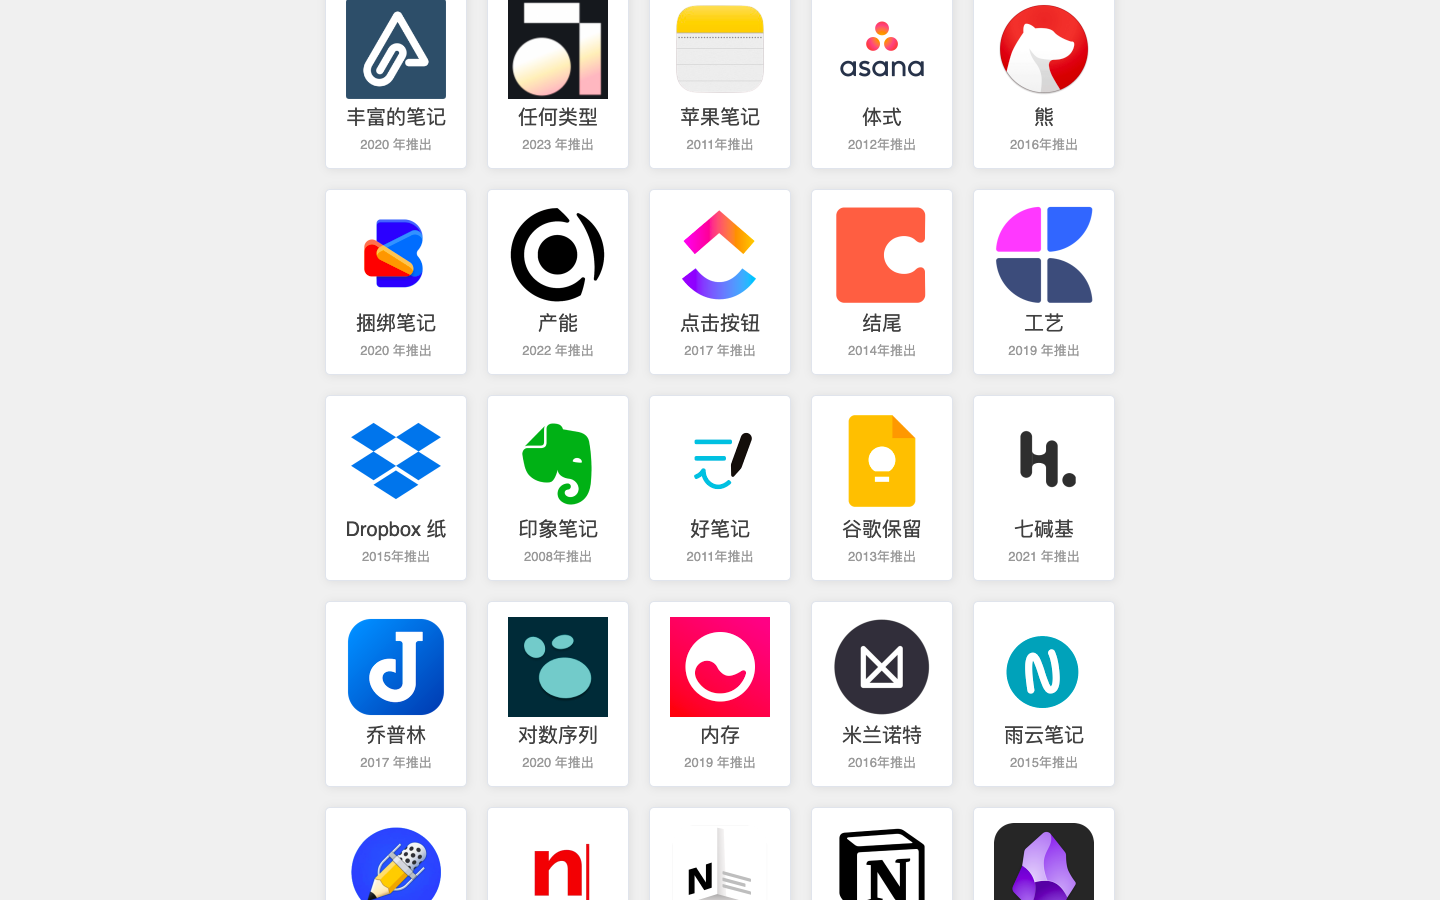 NoteApps